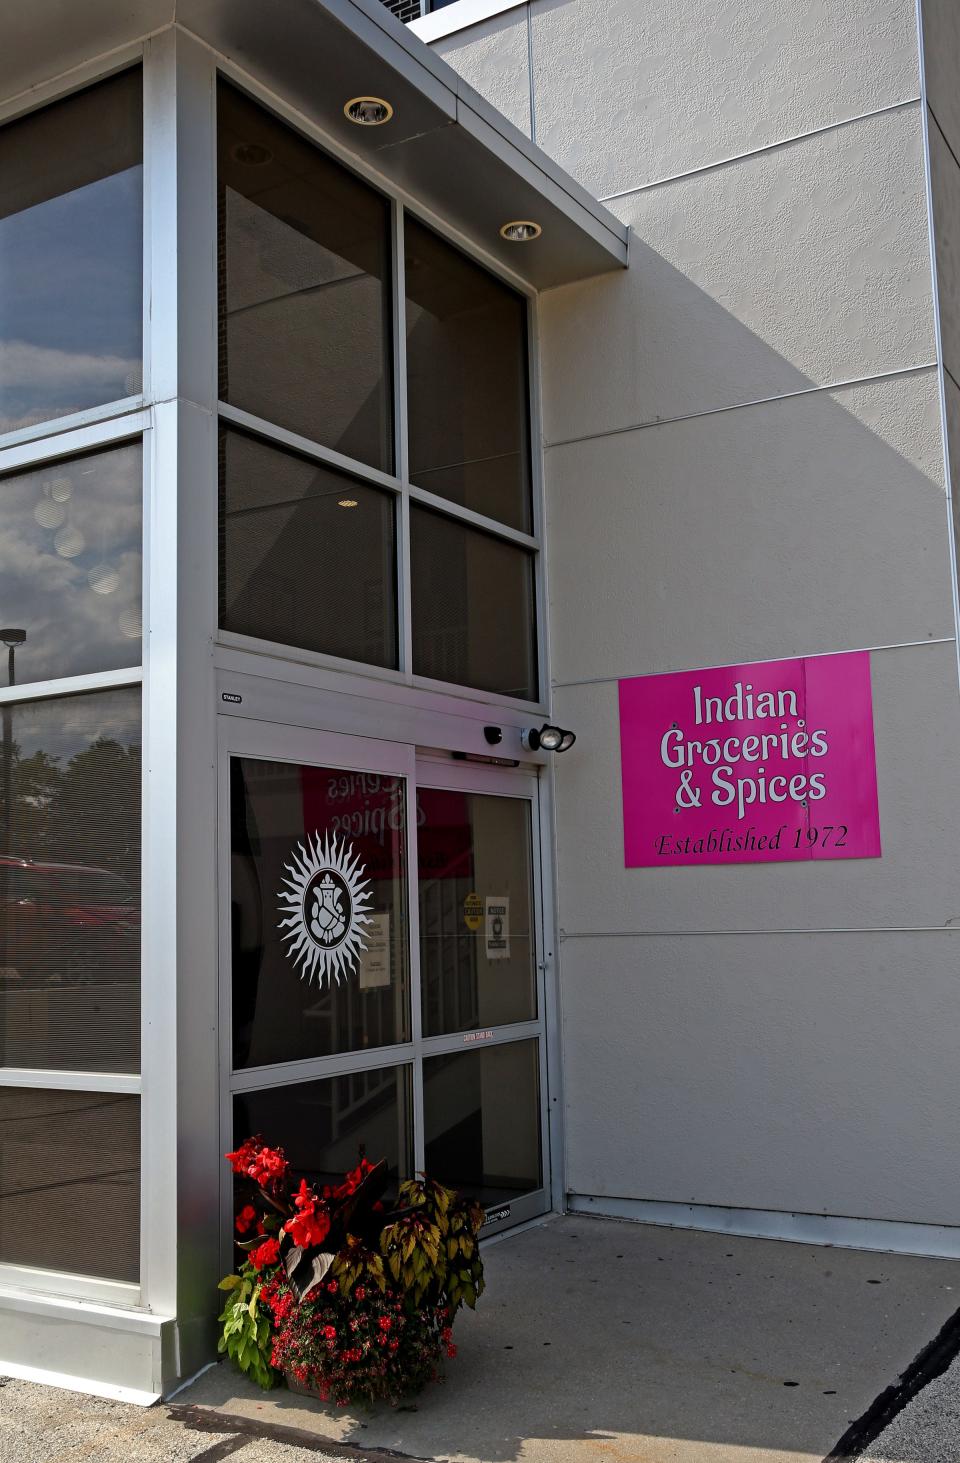 Indian Groceries and Spices, at 10701 W. North Ave. in Wauwatosa, has a parking lot and entrance at the back of the building.